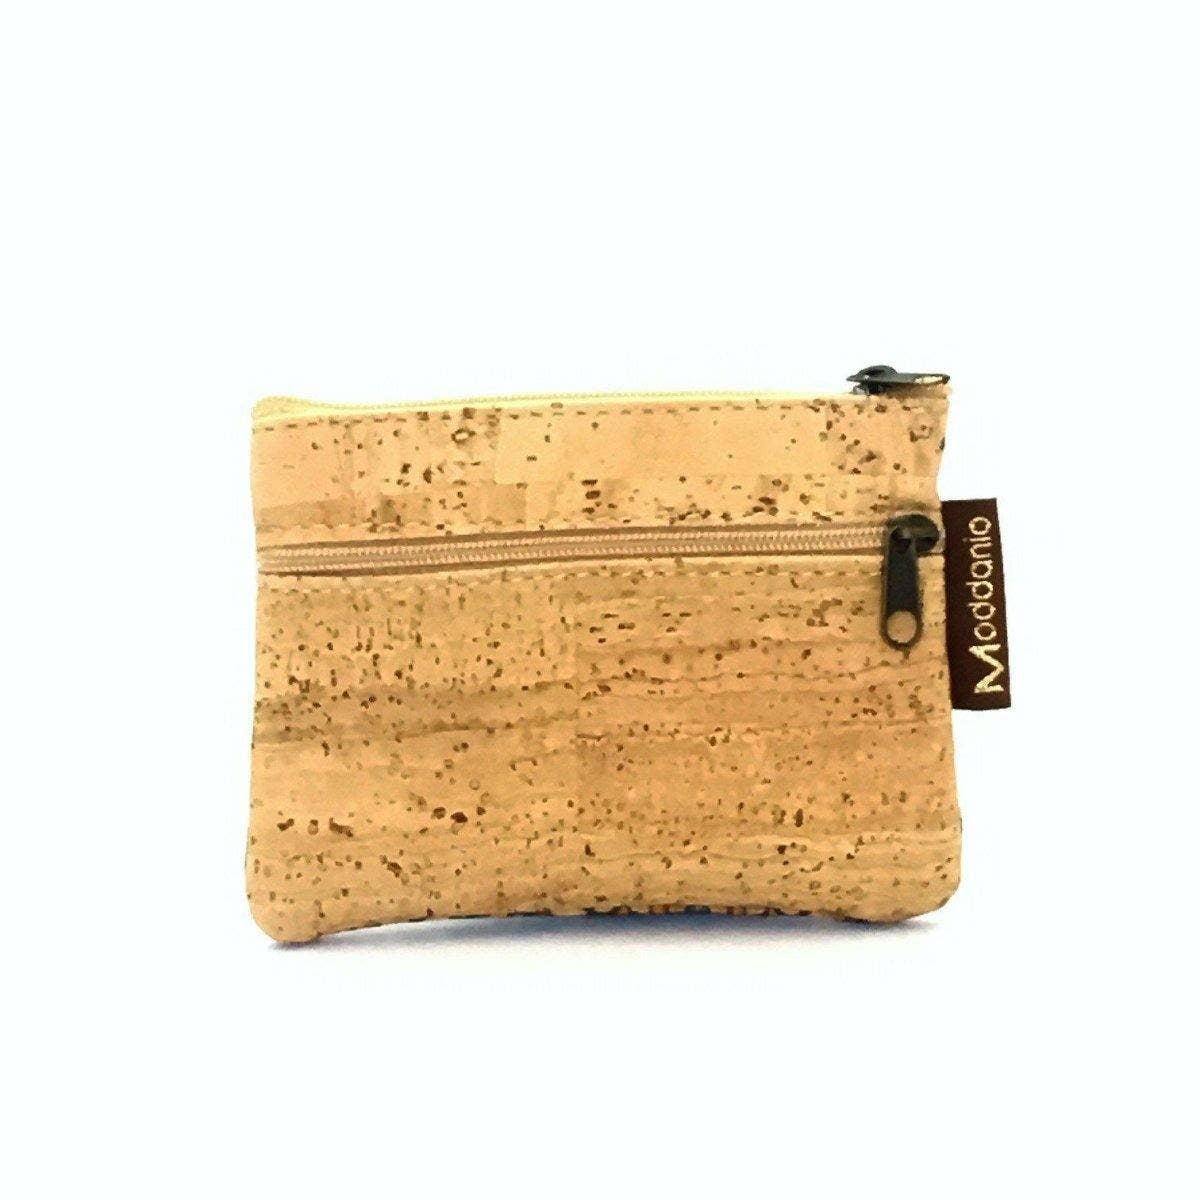 Cork Coin Purse and Vegan Change Pouch in green and orange colours